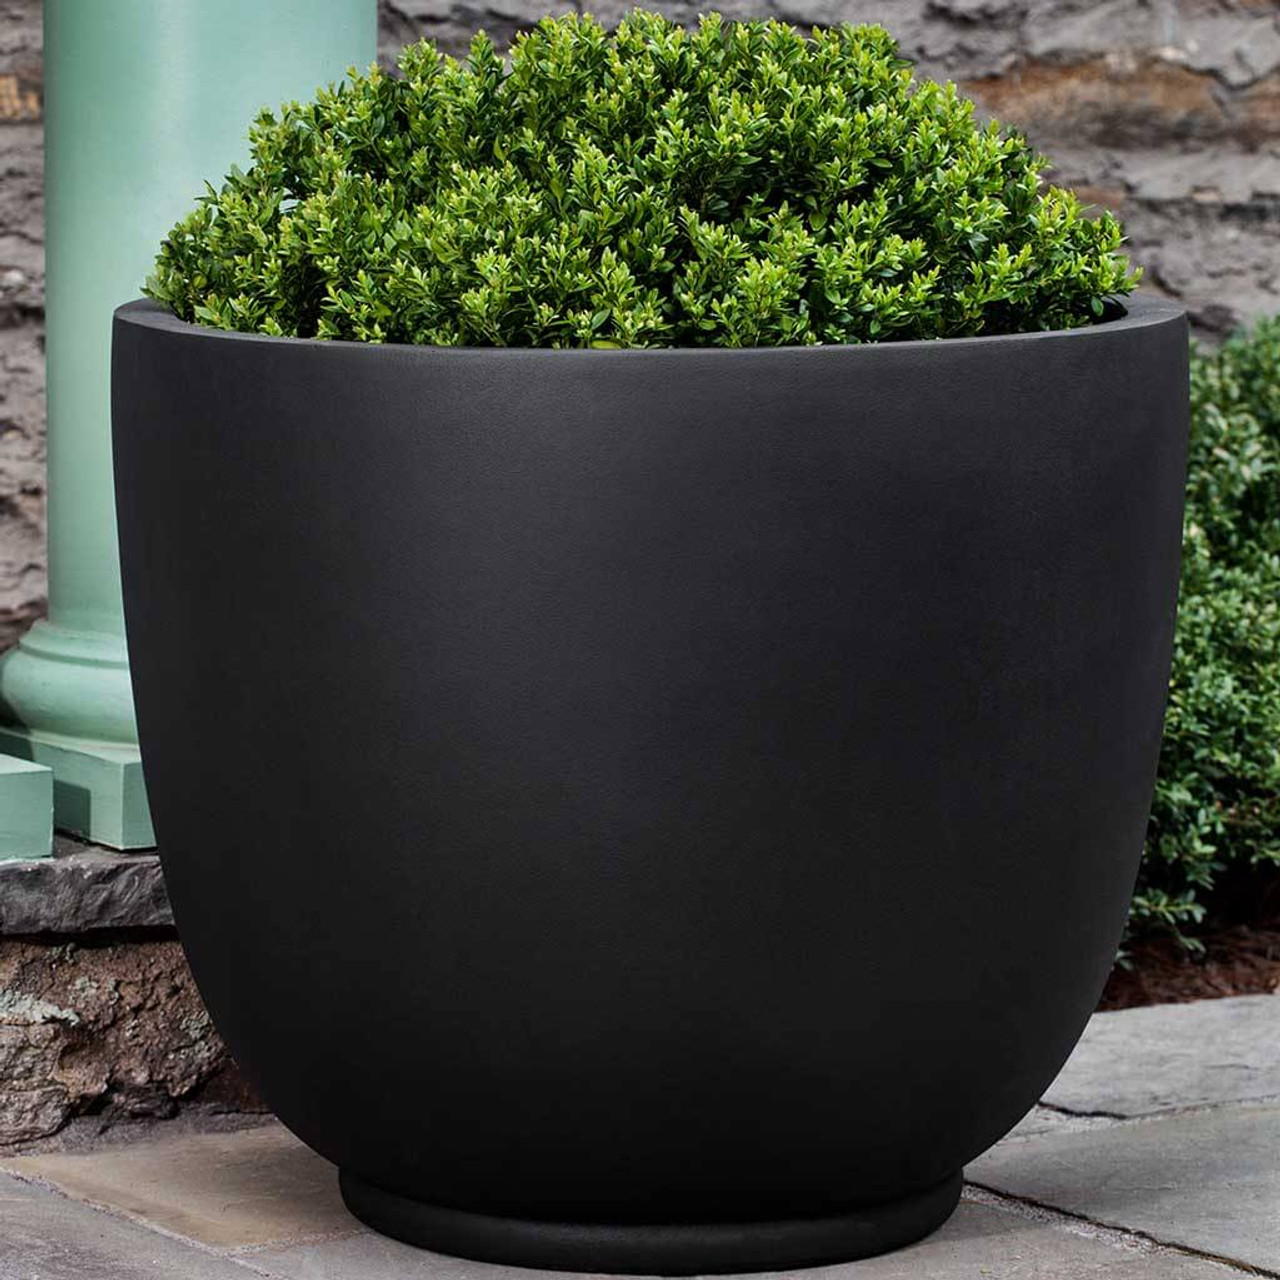 XXL Round Commercial Planter: Extra Large Round Planters